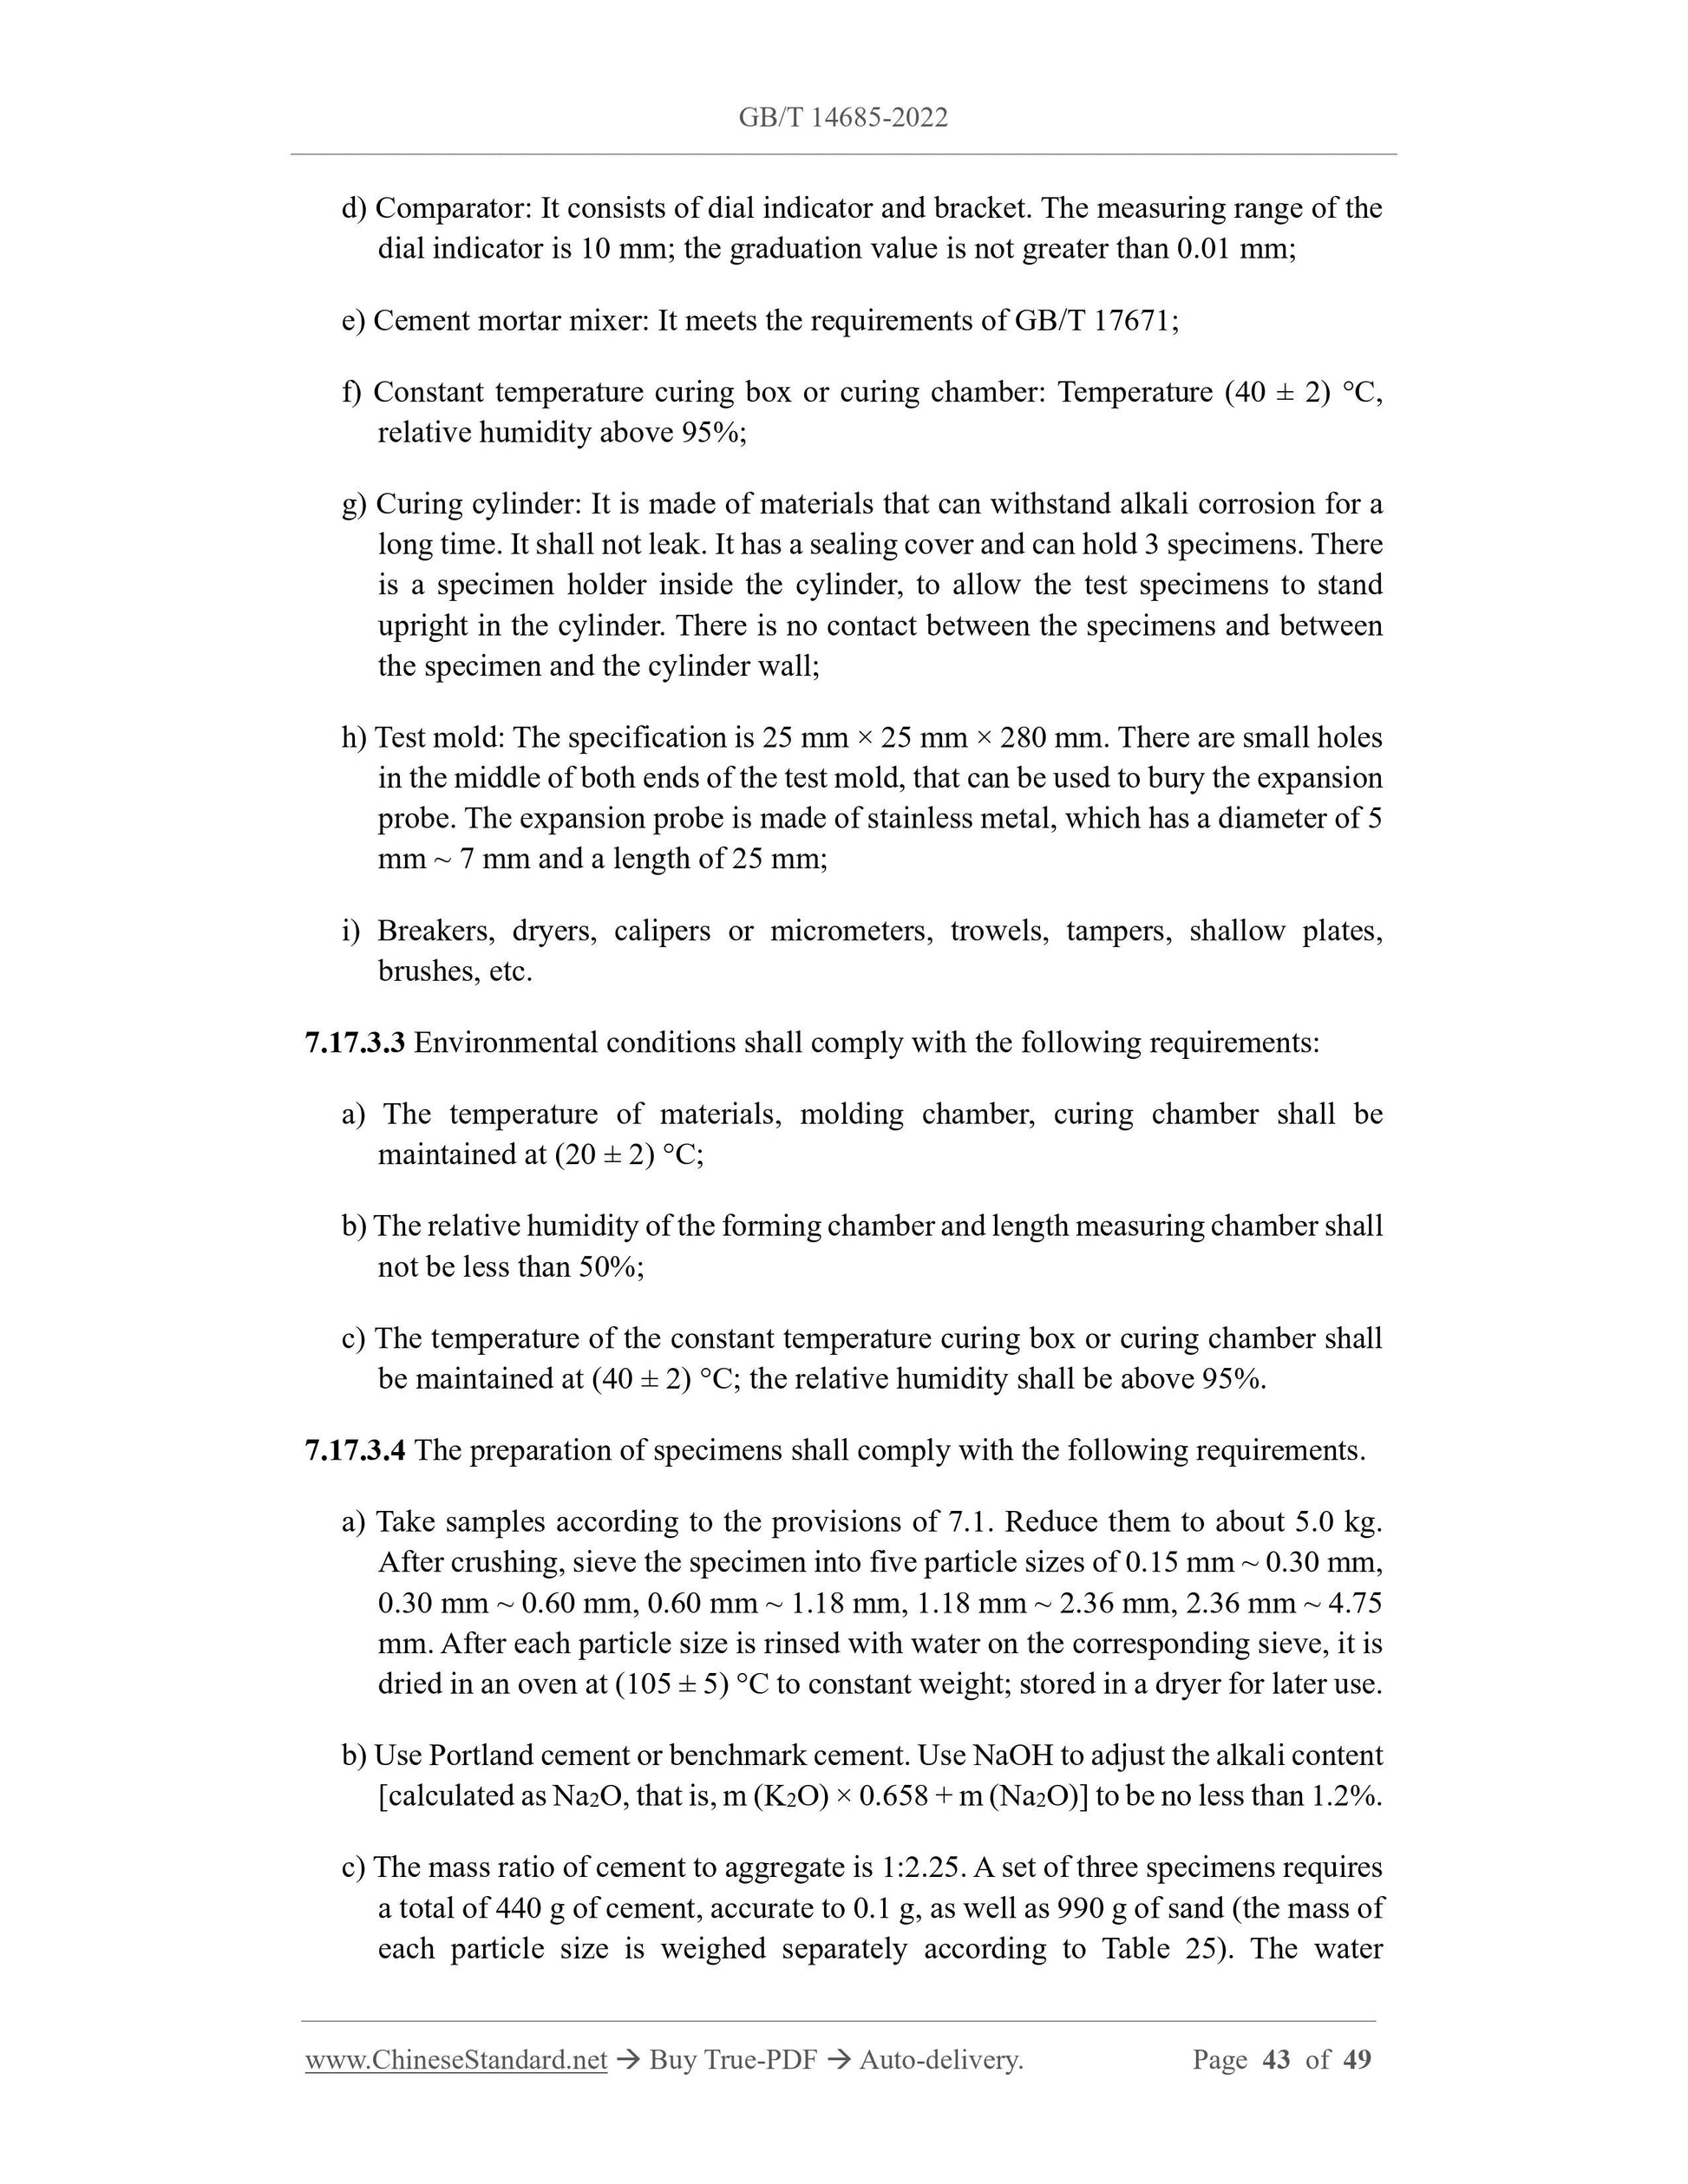 GB/T 14685-2022 Page 11